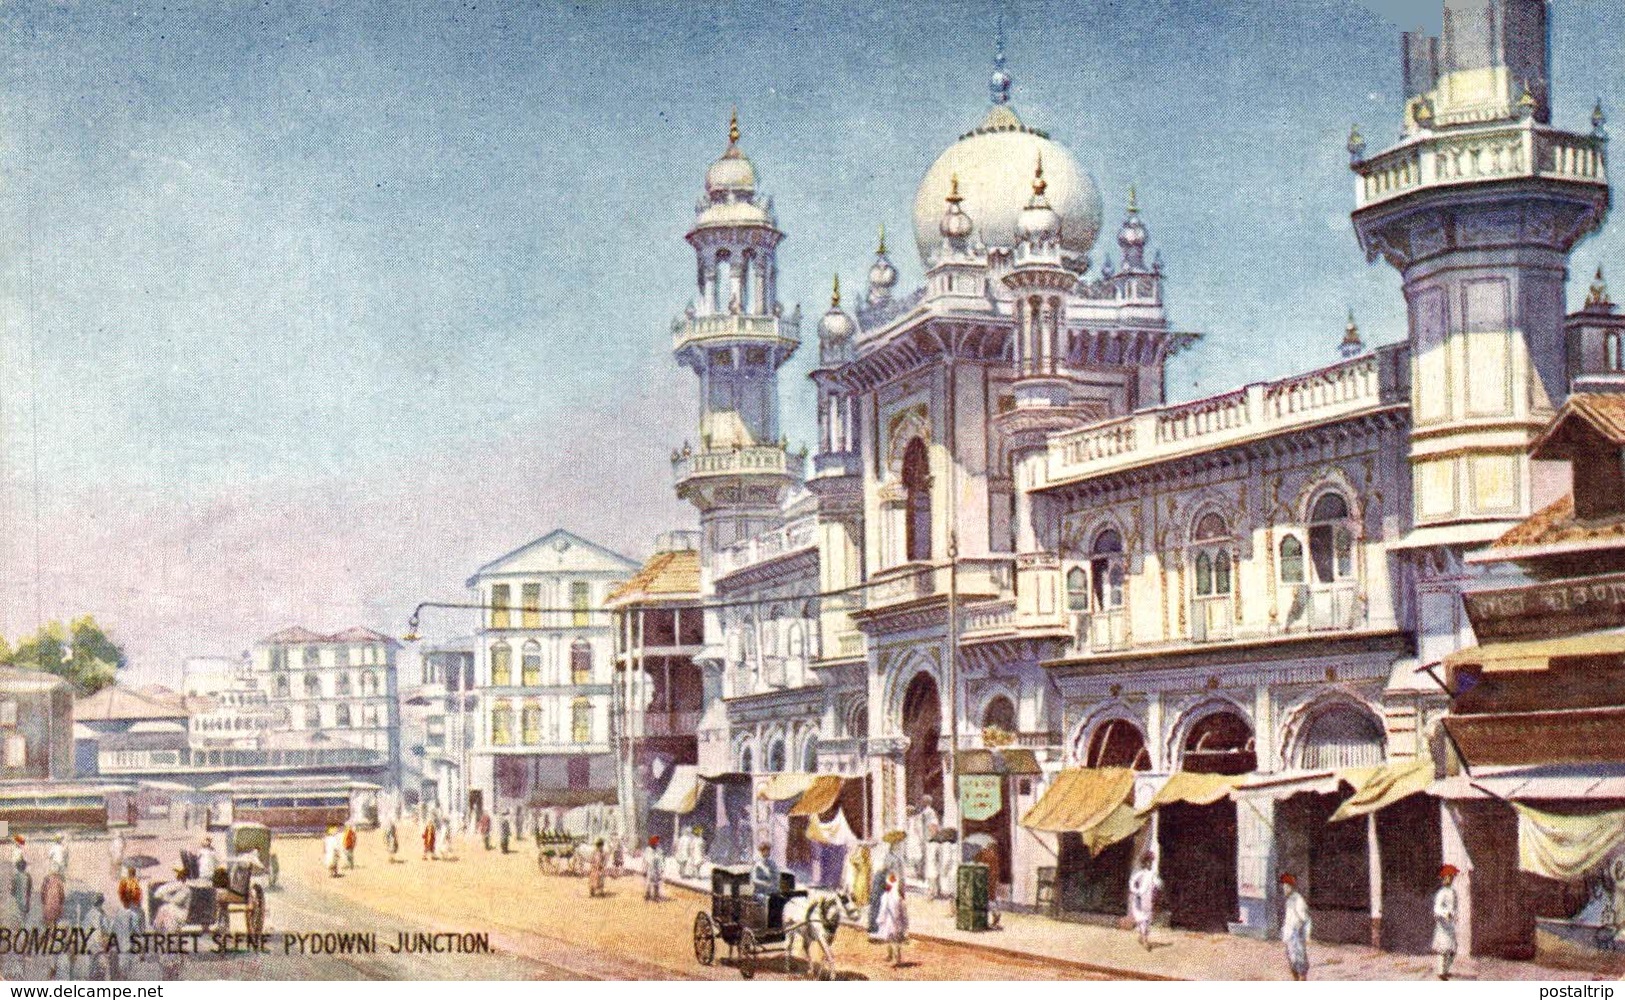 Bombay, A Stret Scene. Pydowni Junction. INDIA // INDE. - India